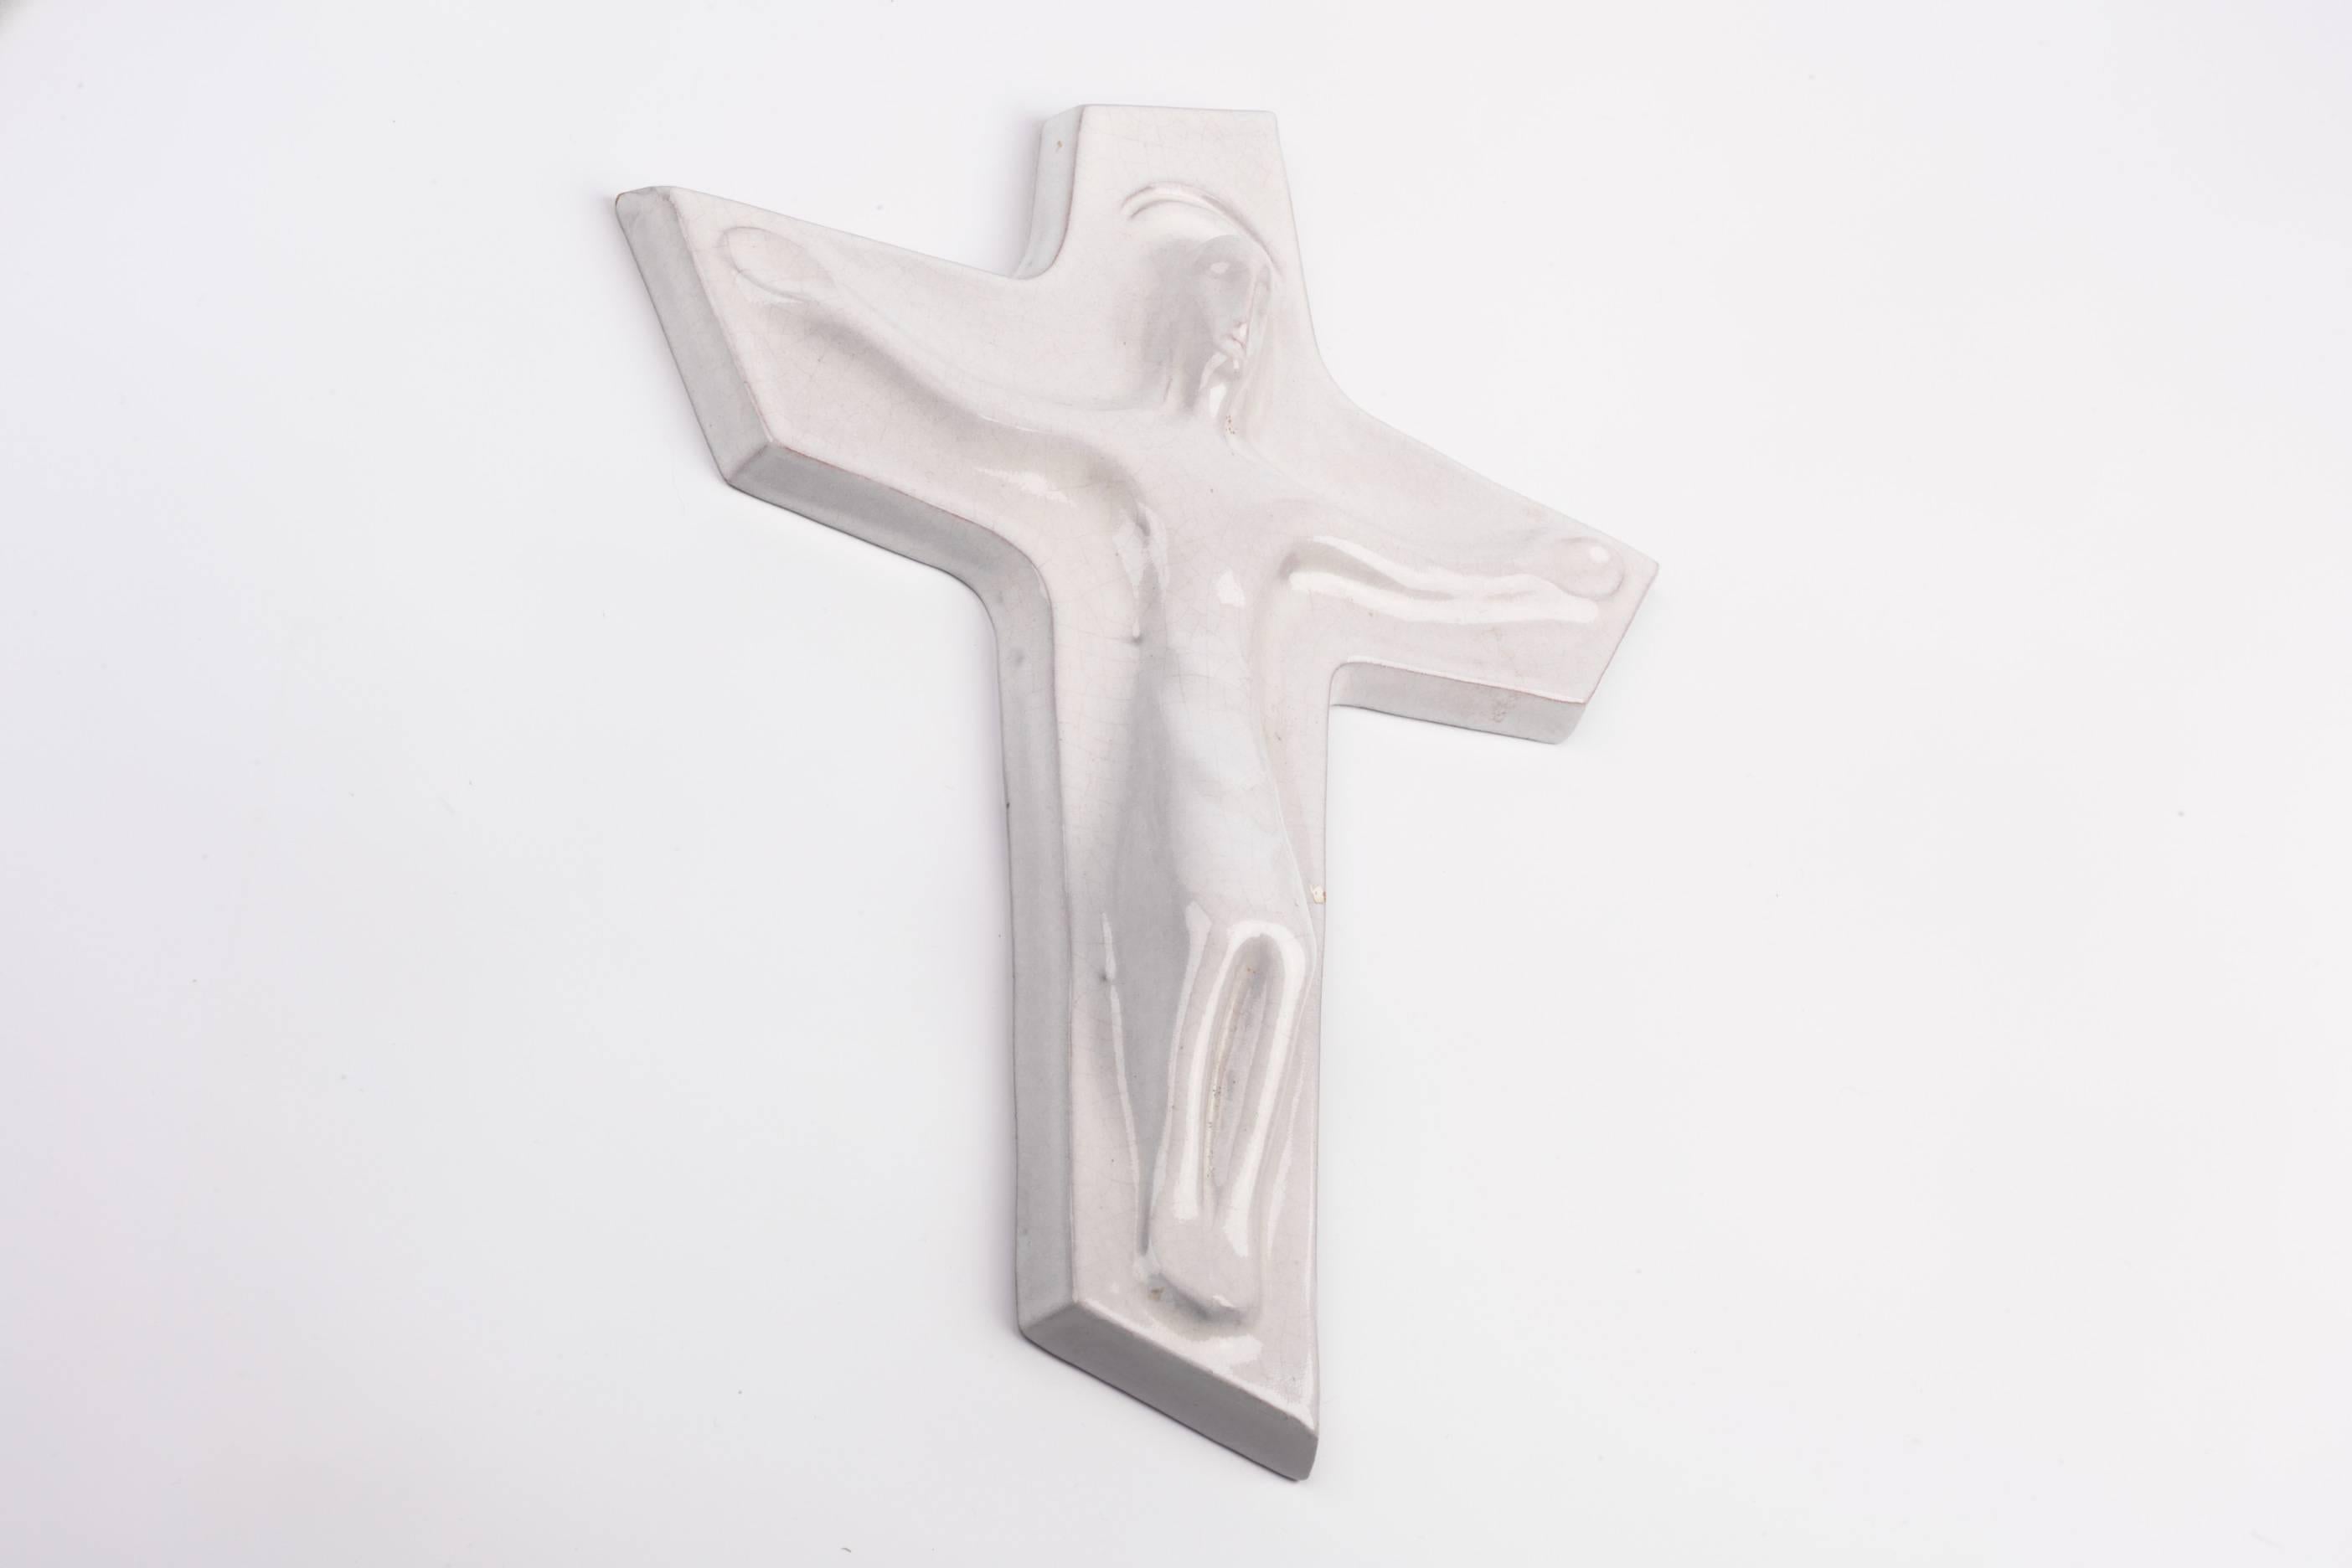 Neoclassical Wall Crucifix in Glazed Ceramic, Hand-Painted, White, Made in Belgium, 1950s For Sale